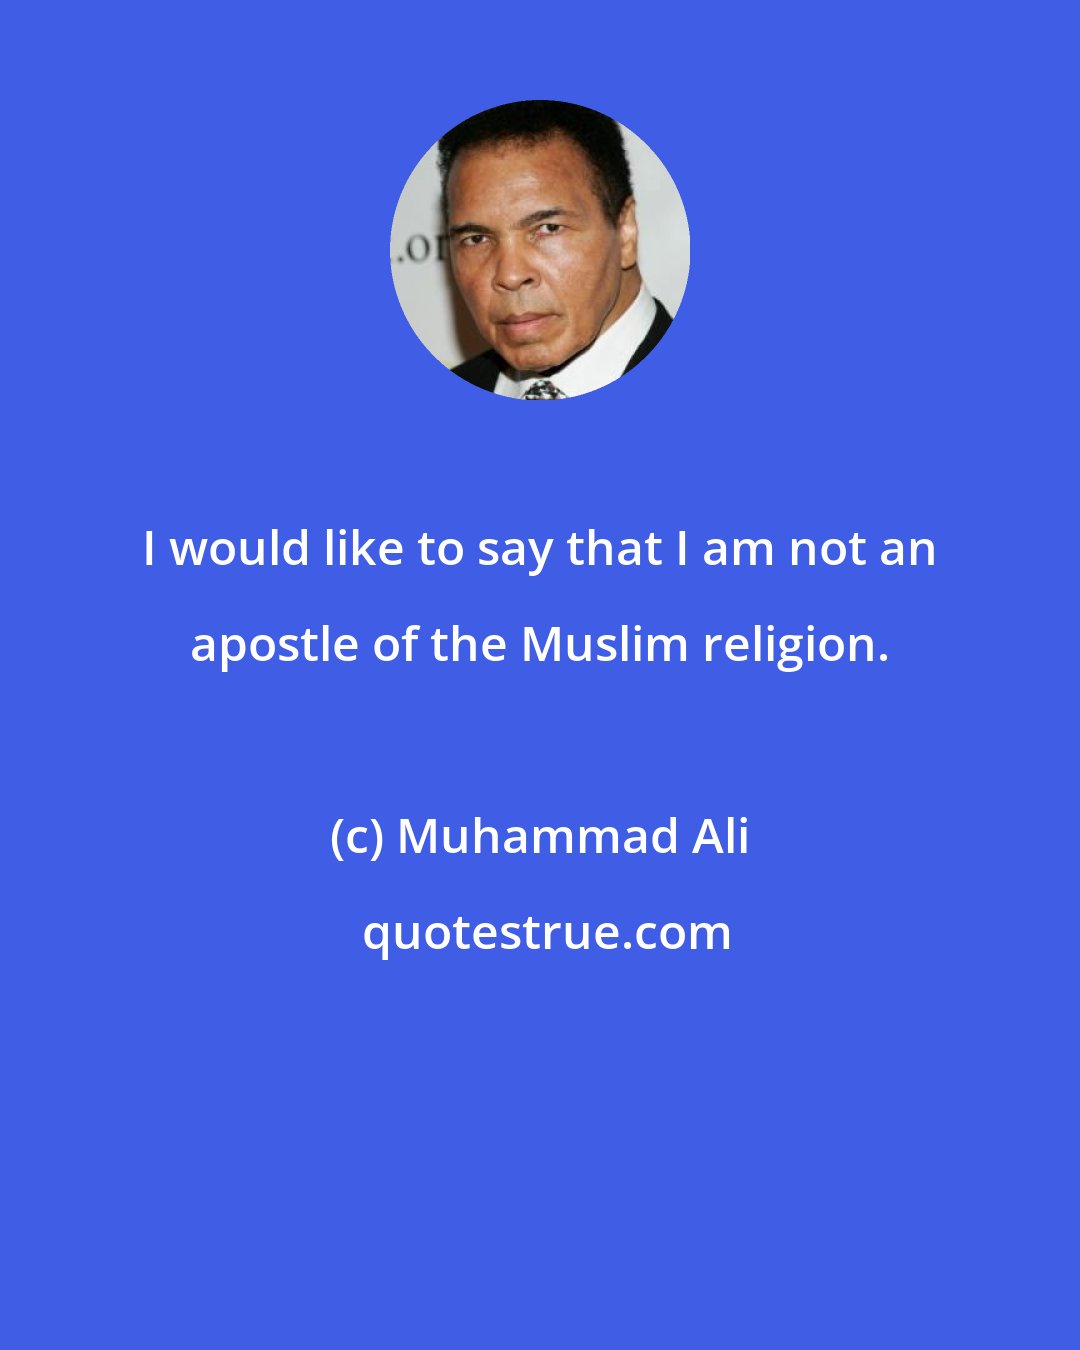 Muhammad Ali: I would like to say that I am not an apostle of the Muslim religion.